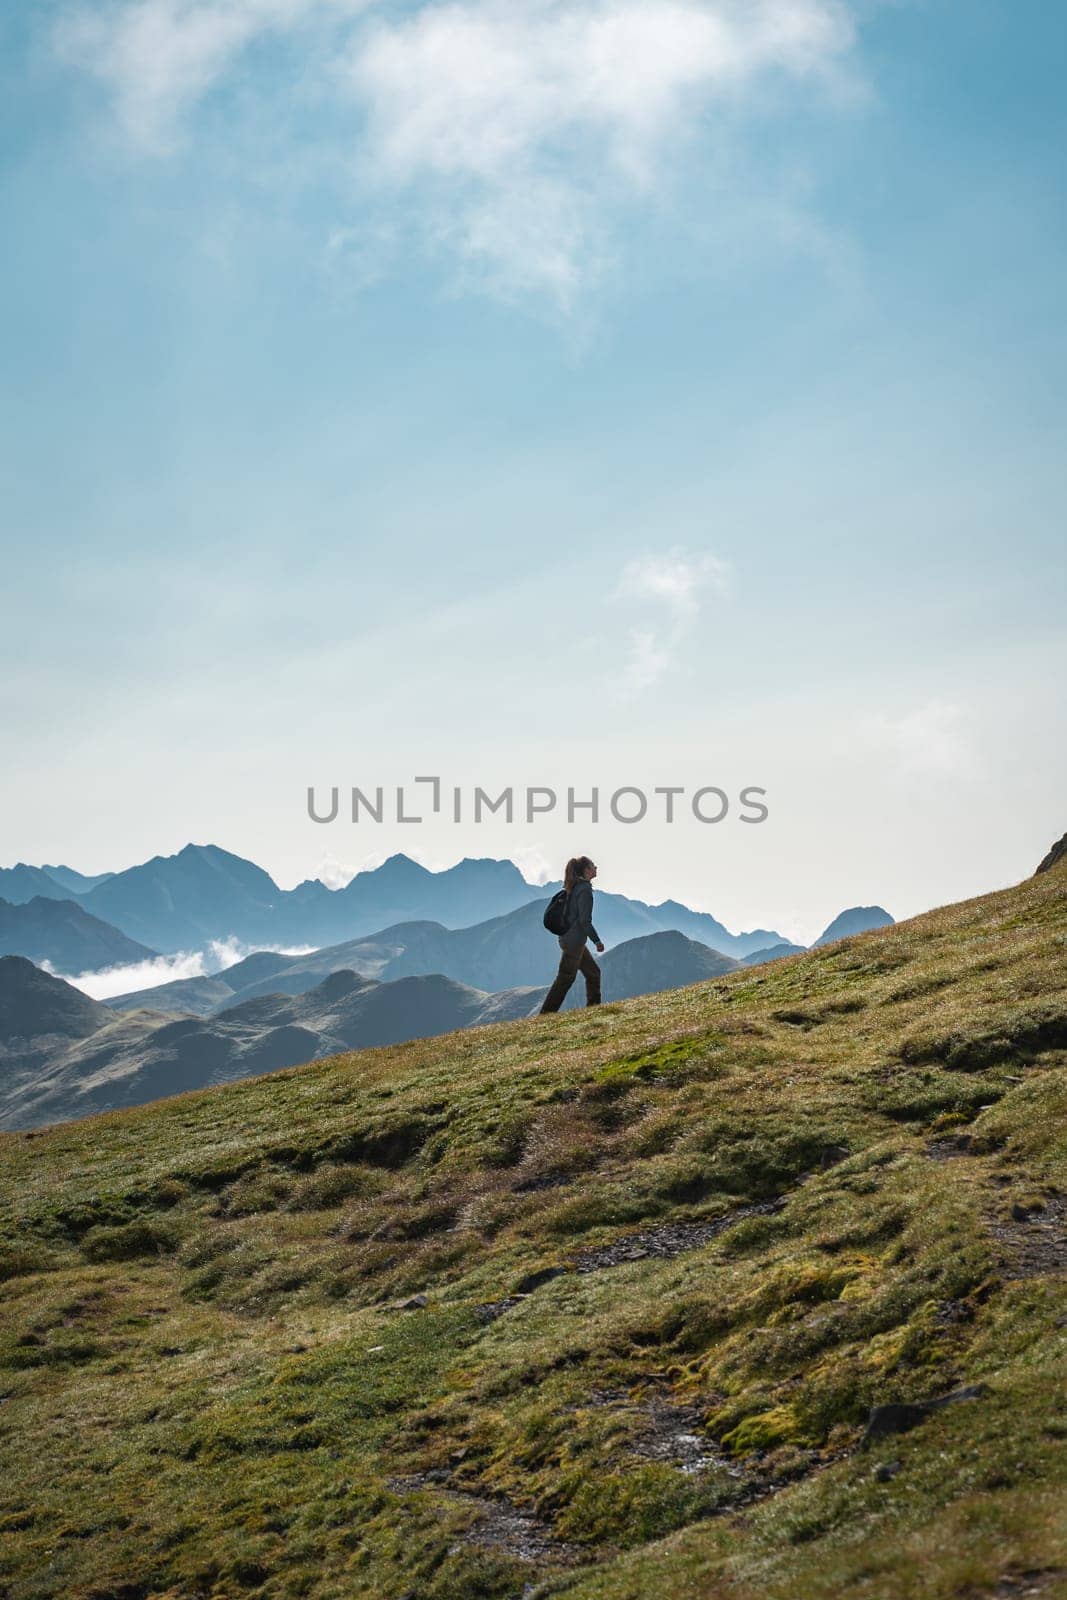 A person is leisurely strolling up a grassy slope in the scenic mountains by PaulCarr